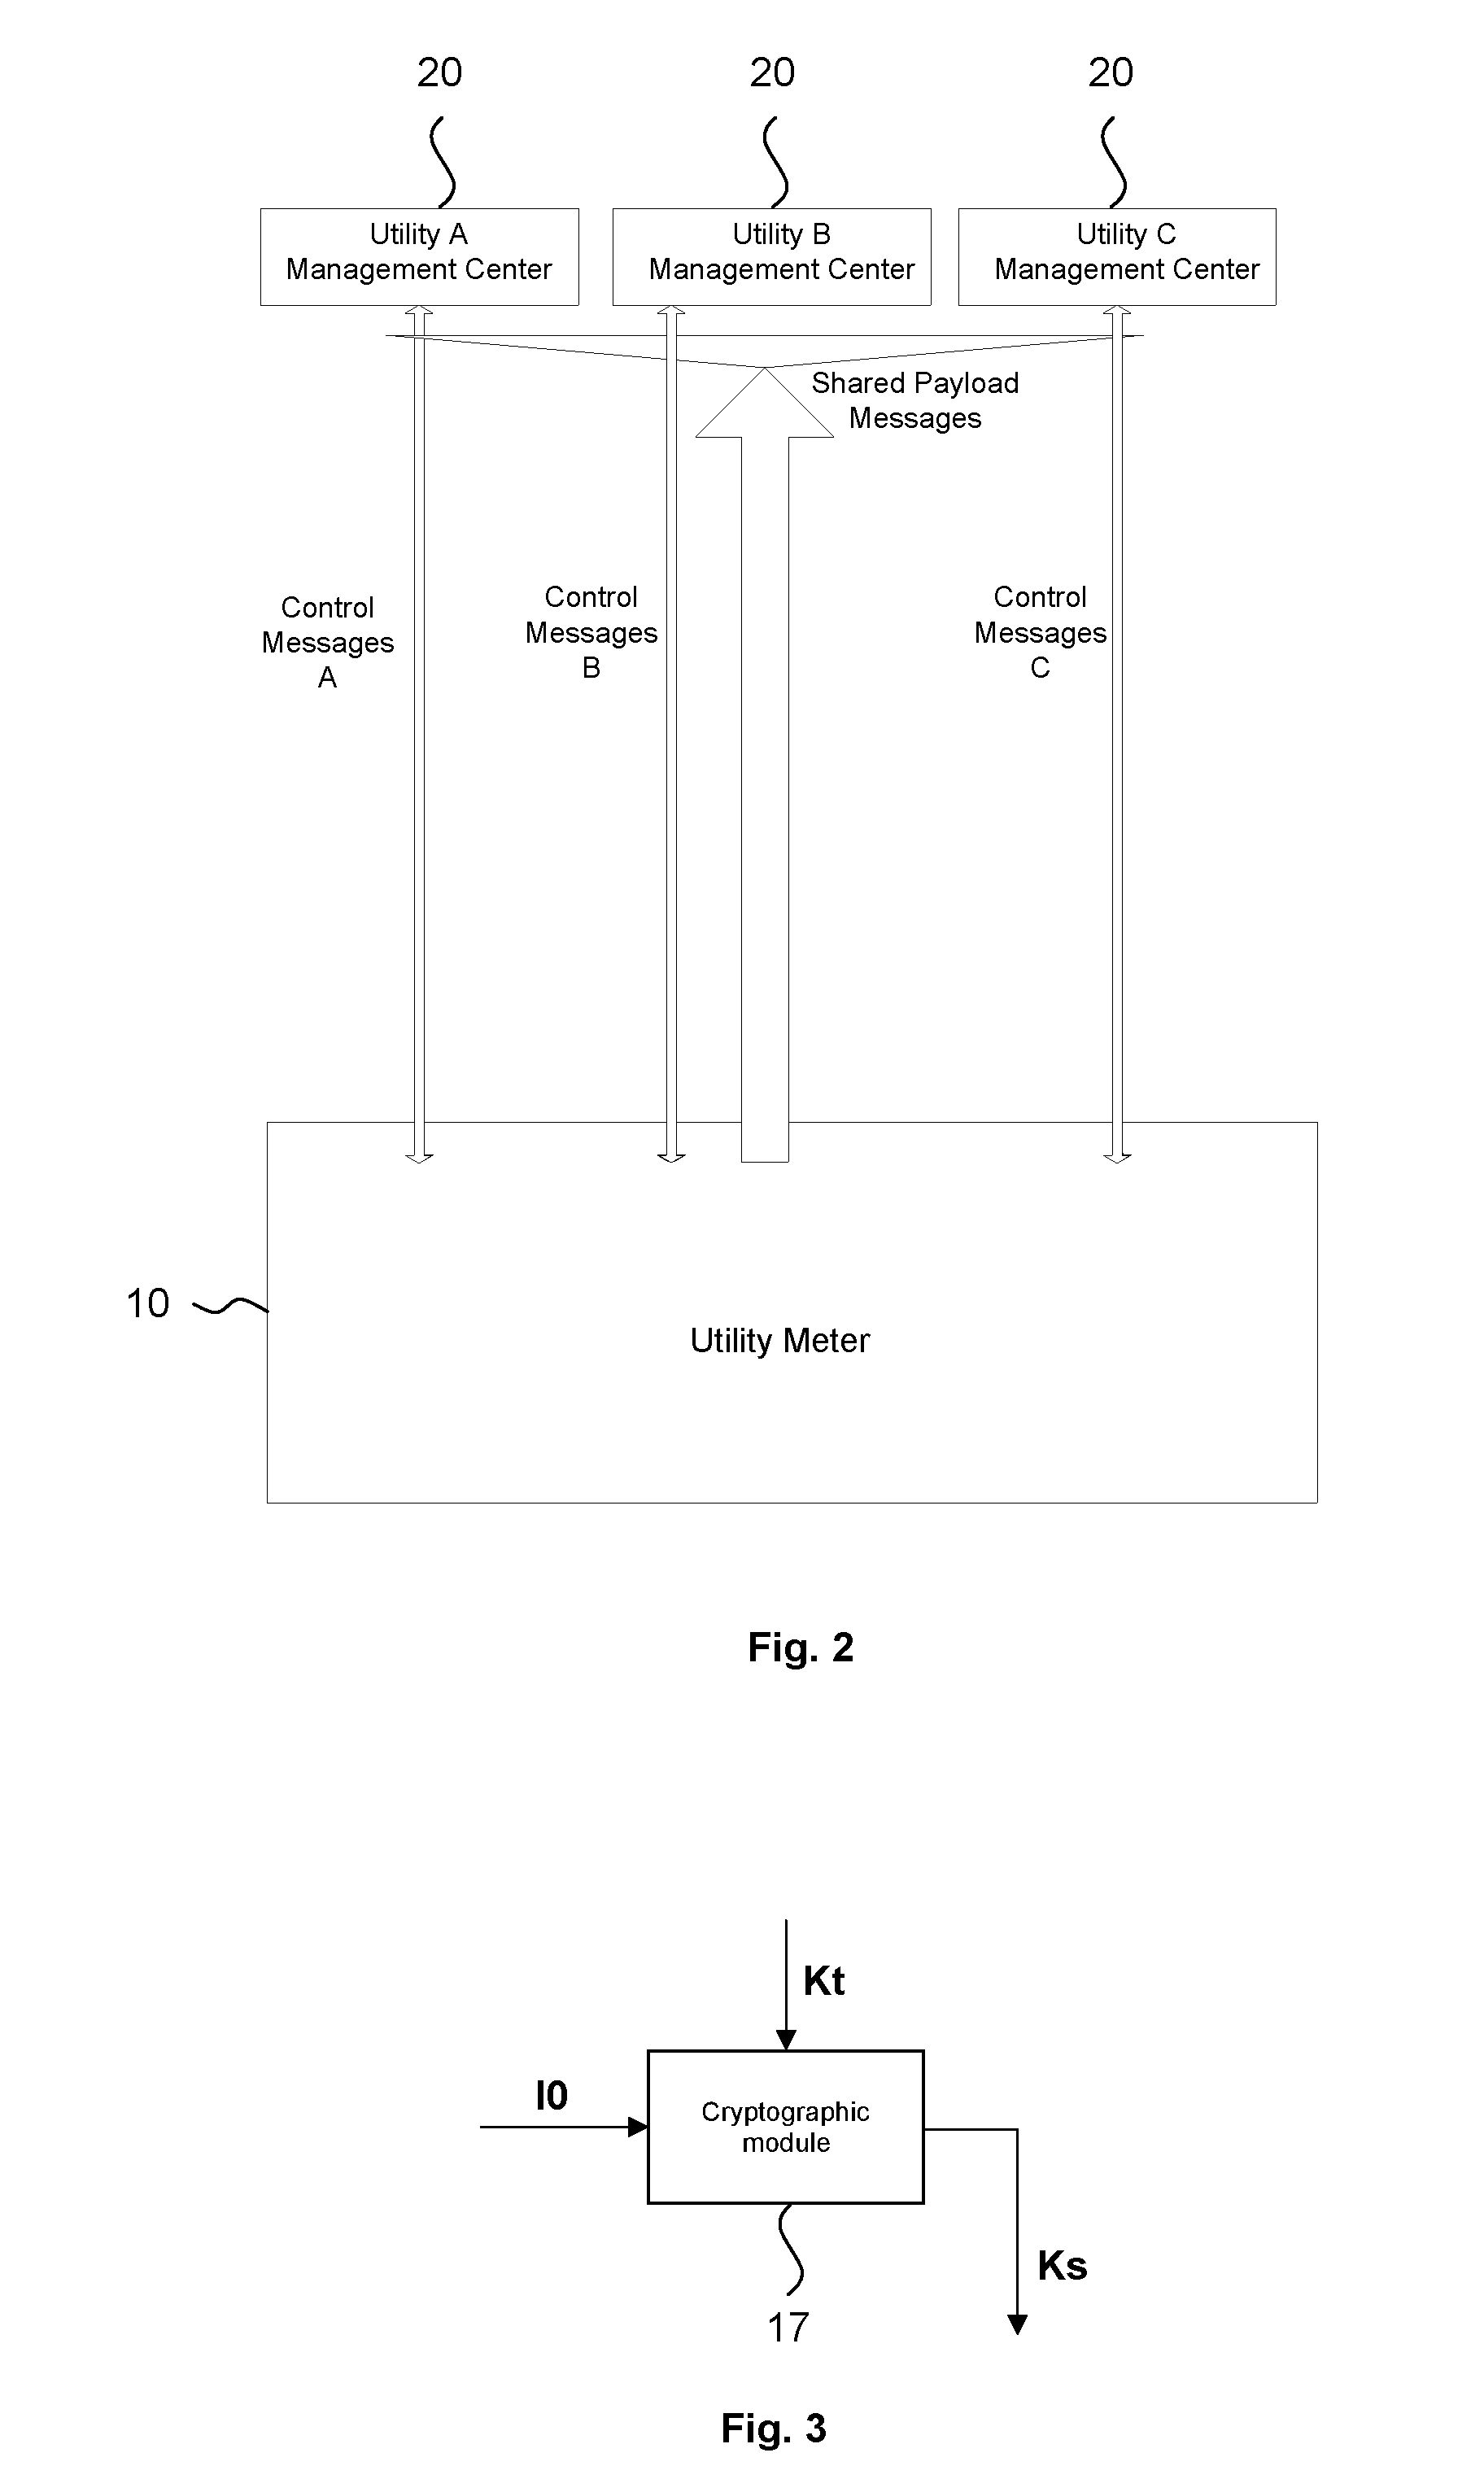 Utility meter for metering a utility consumption and optimizing upstream communications and method for managing these communications